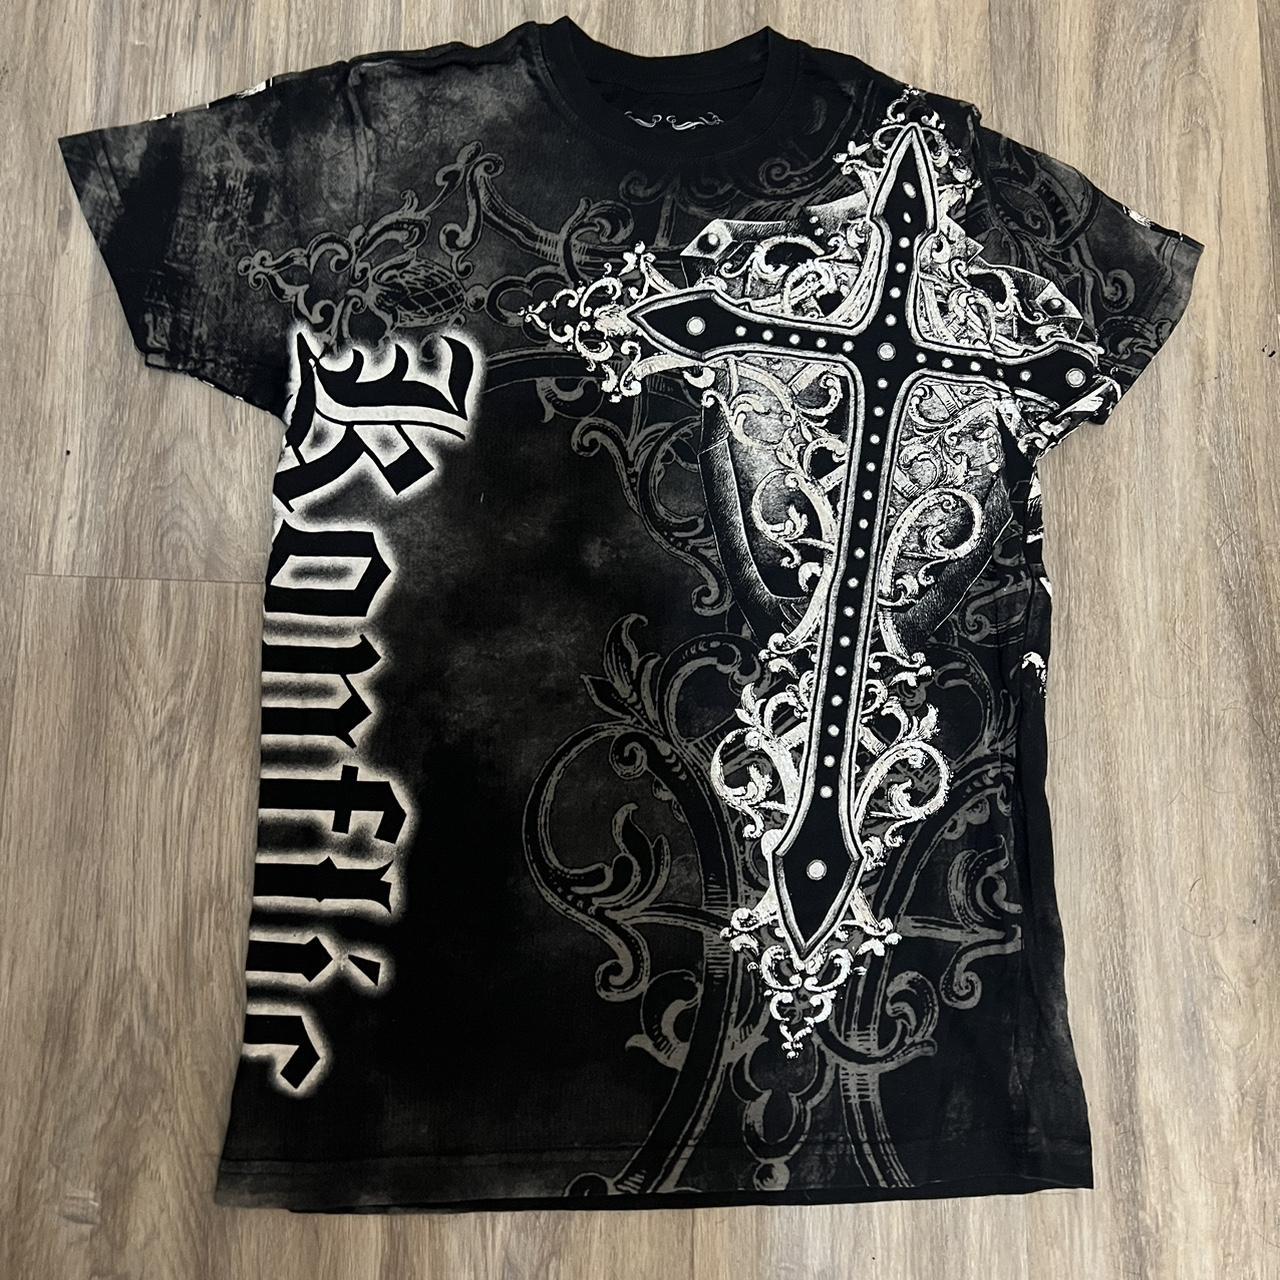 Affliction Men's Black and Silver T-shirt